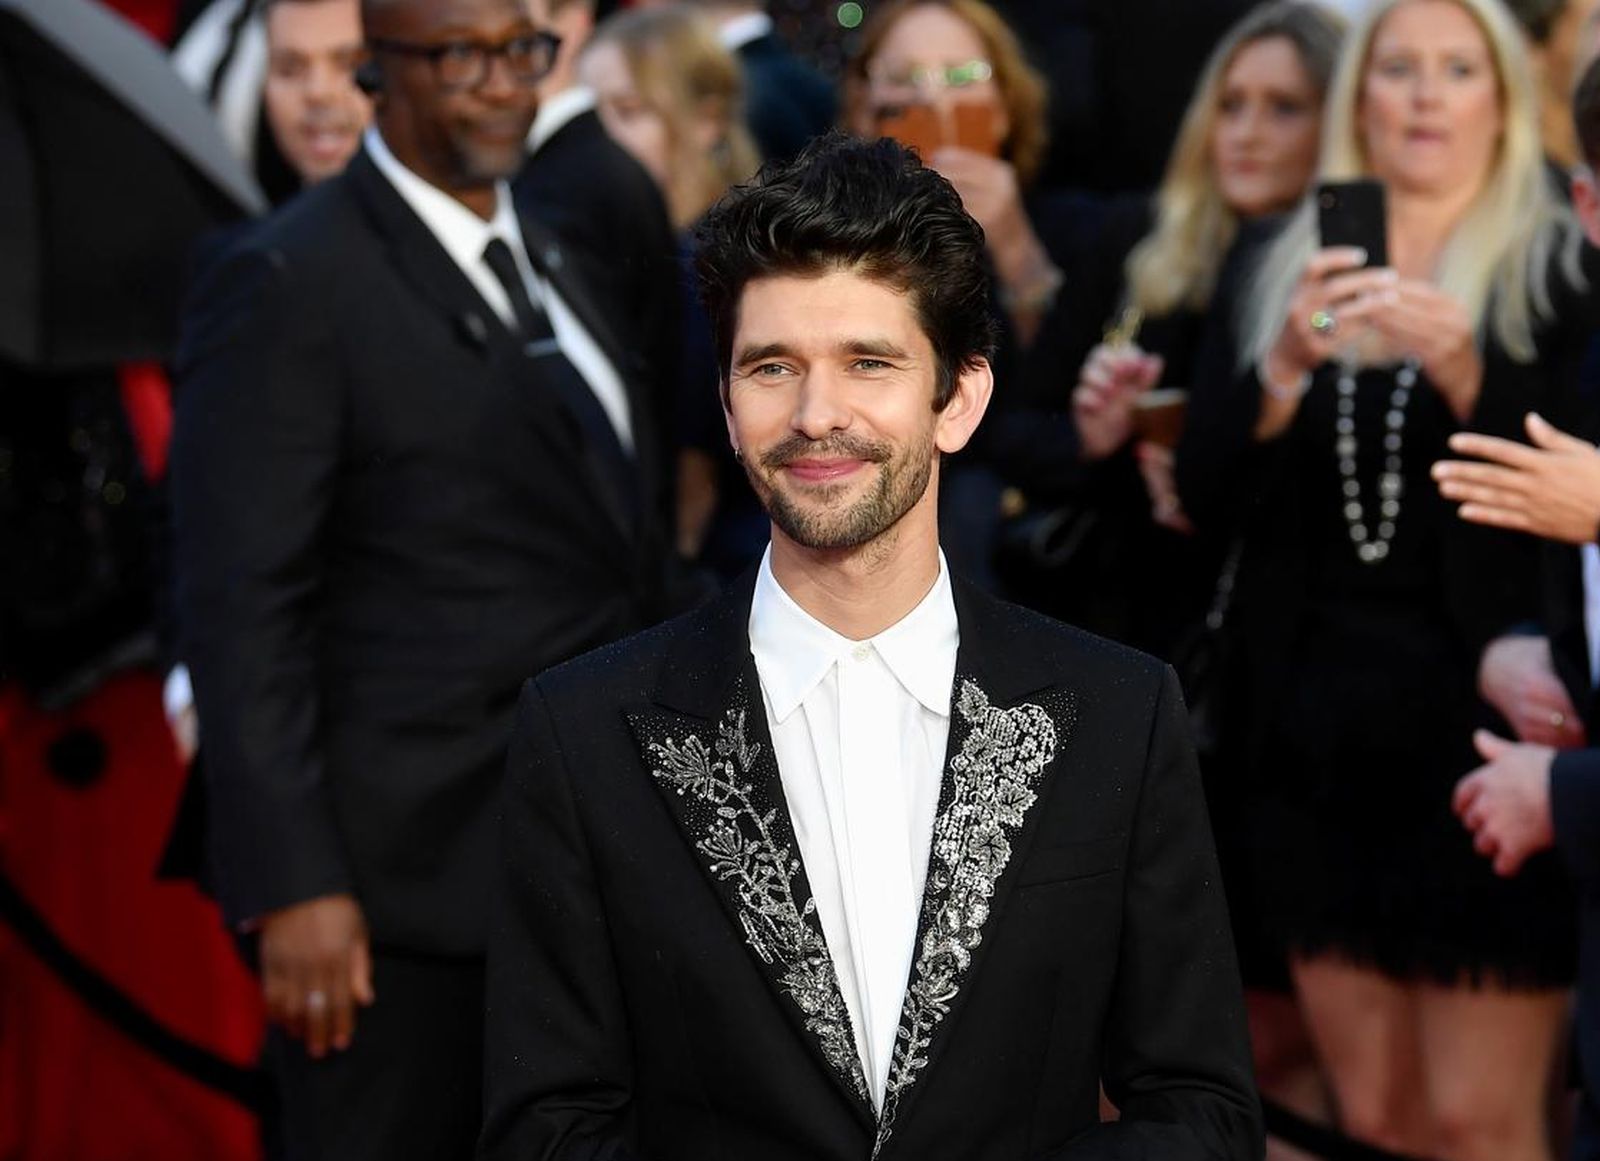 Cast member Ben Whishaw poses during the world premiere of the new James Bond film "No Time To Die" at the Royal Albert Hall in London, Britain, September 28, 2021. REUTERS/Toby Melville